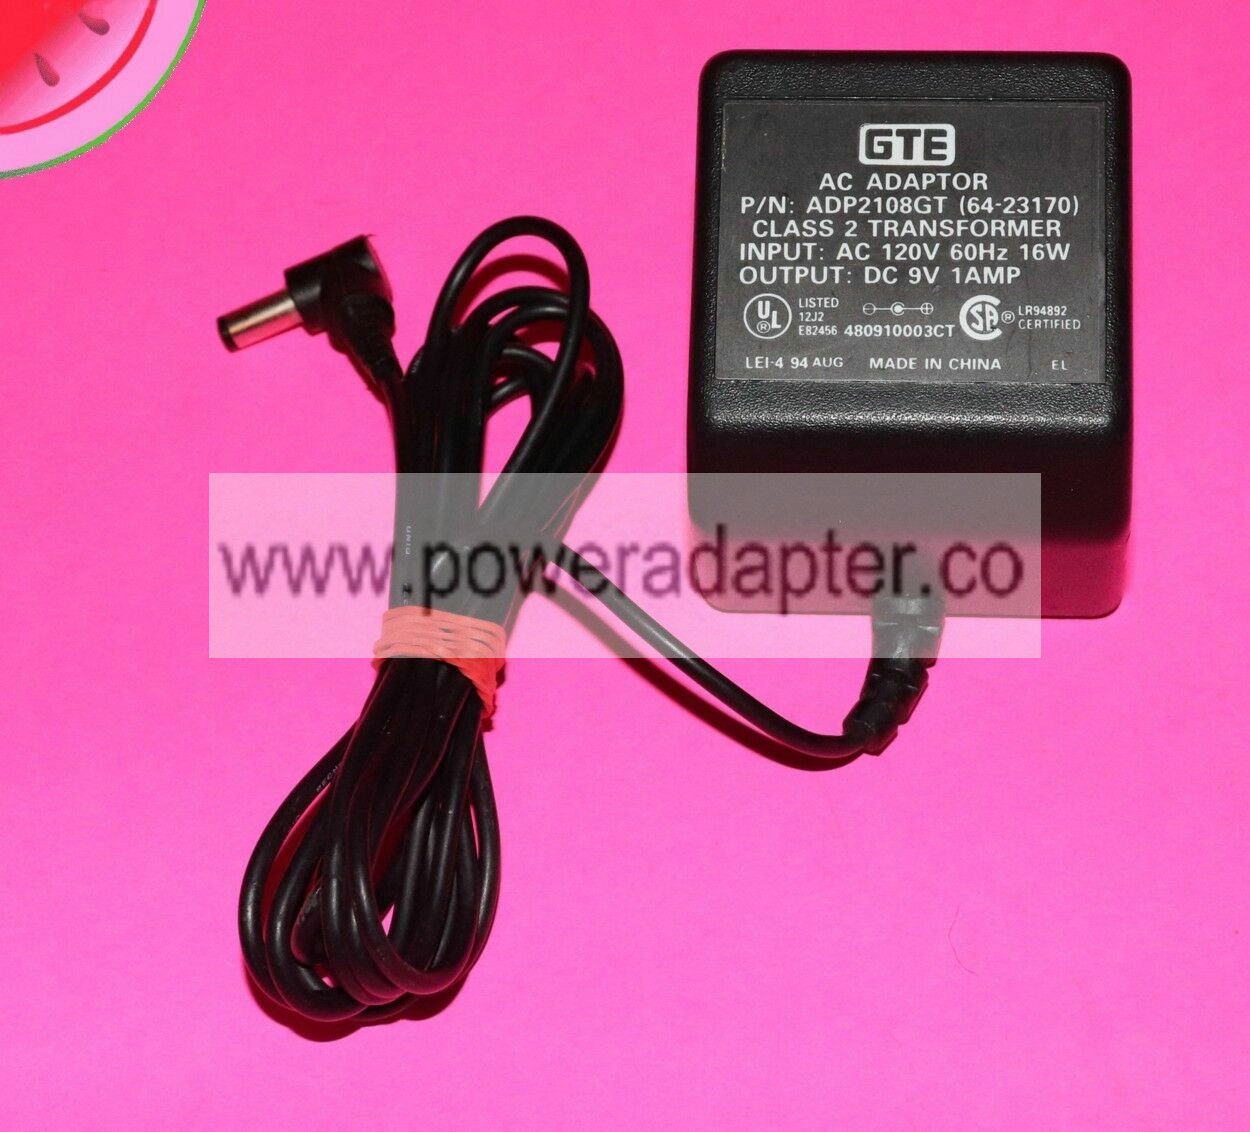 Power Supply Adapter GTE ADP2108GT AC / DC 9V 1amp 1000mA Charger Genuine Bundle Listing: No Brand: GTE Model: ADP